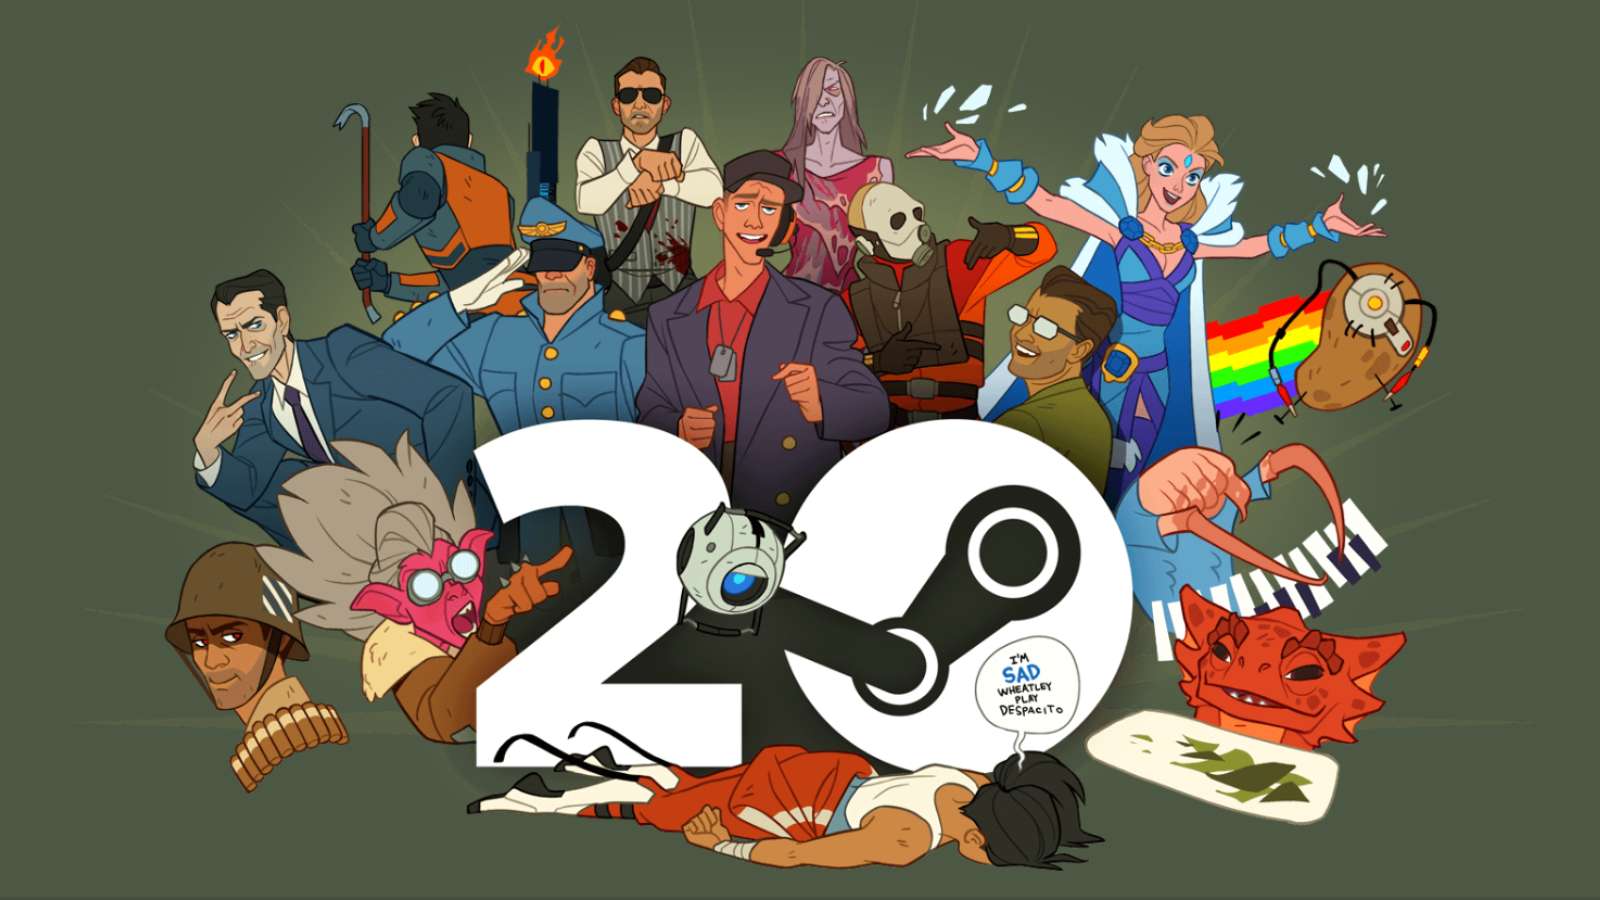 Artwork for Steam's 20th anniversary featuring characters from TF2, Half-Life, Portal, and more